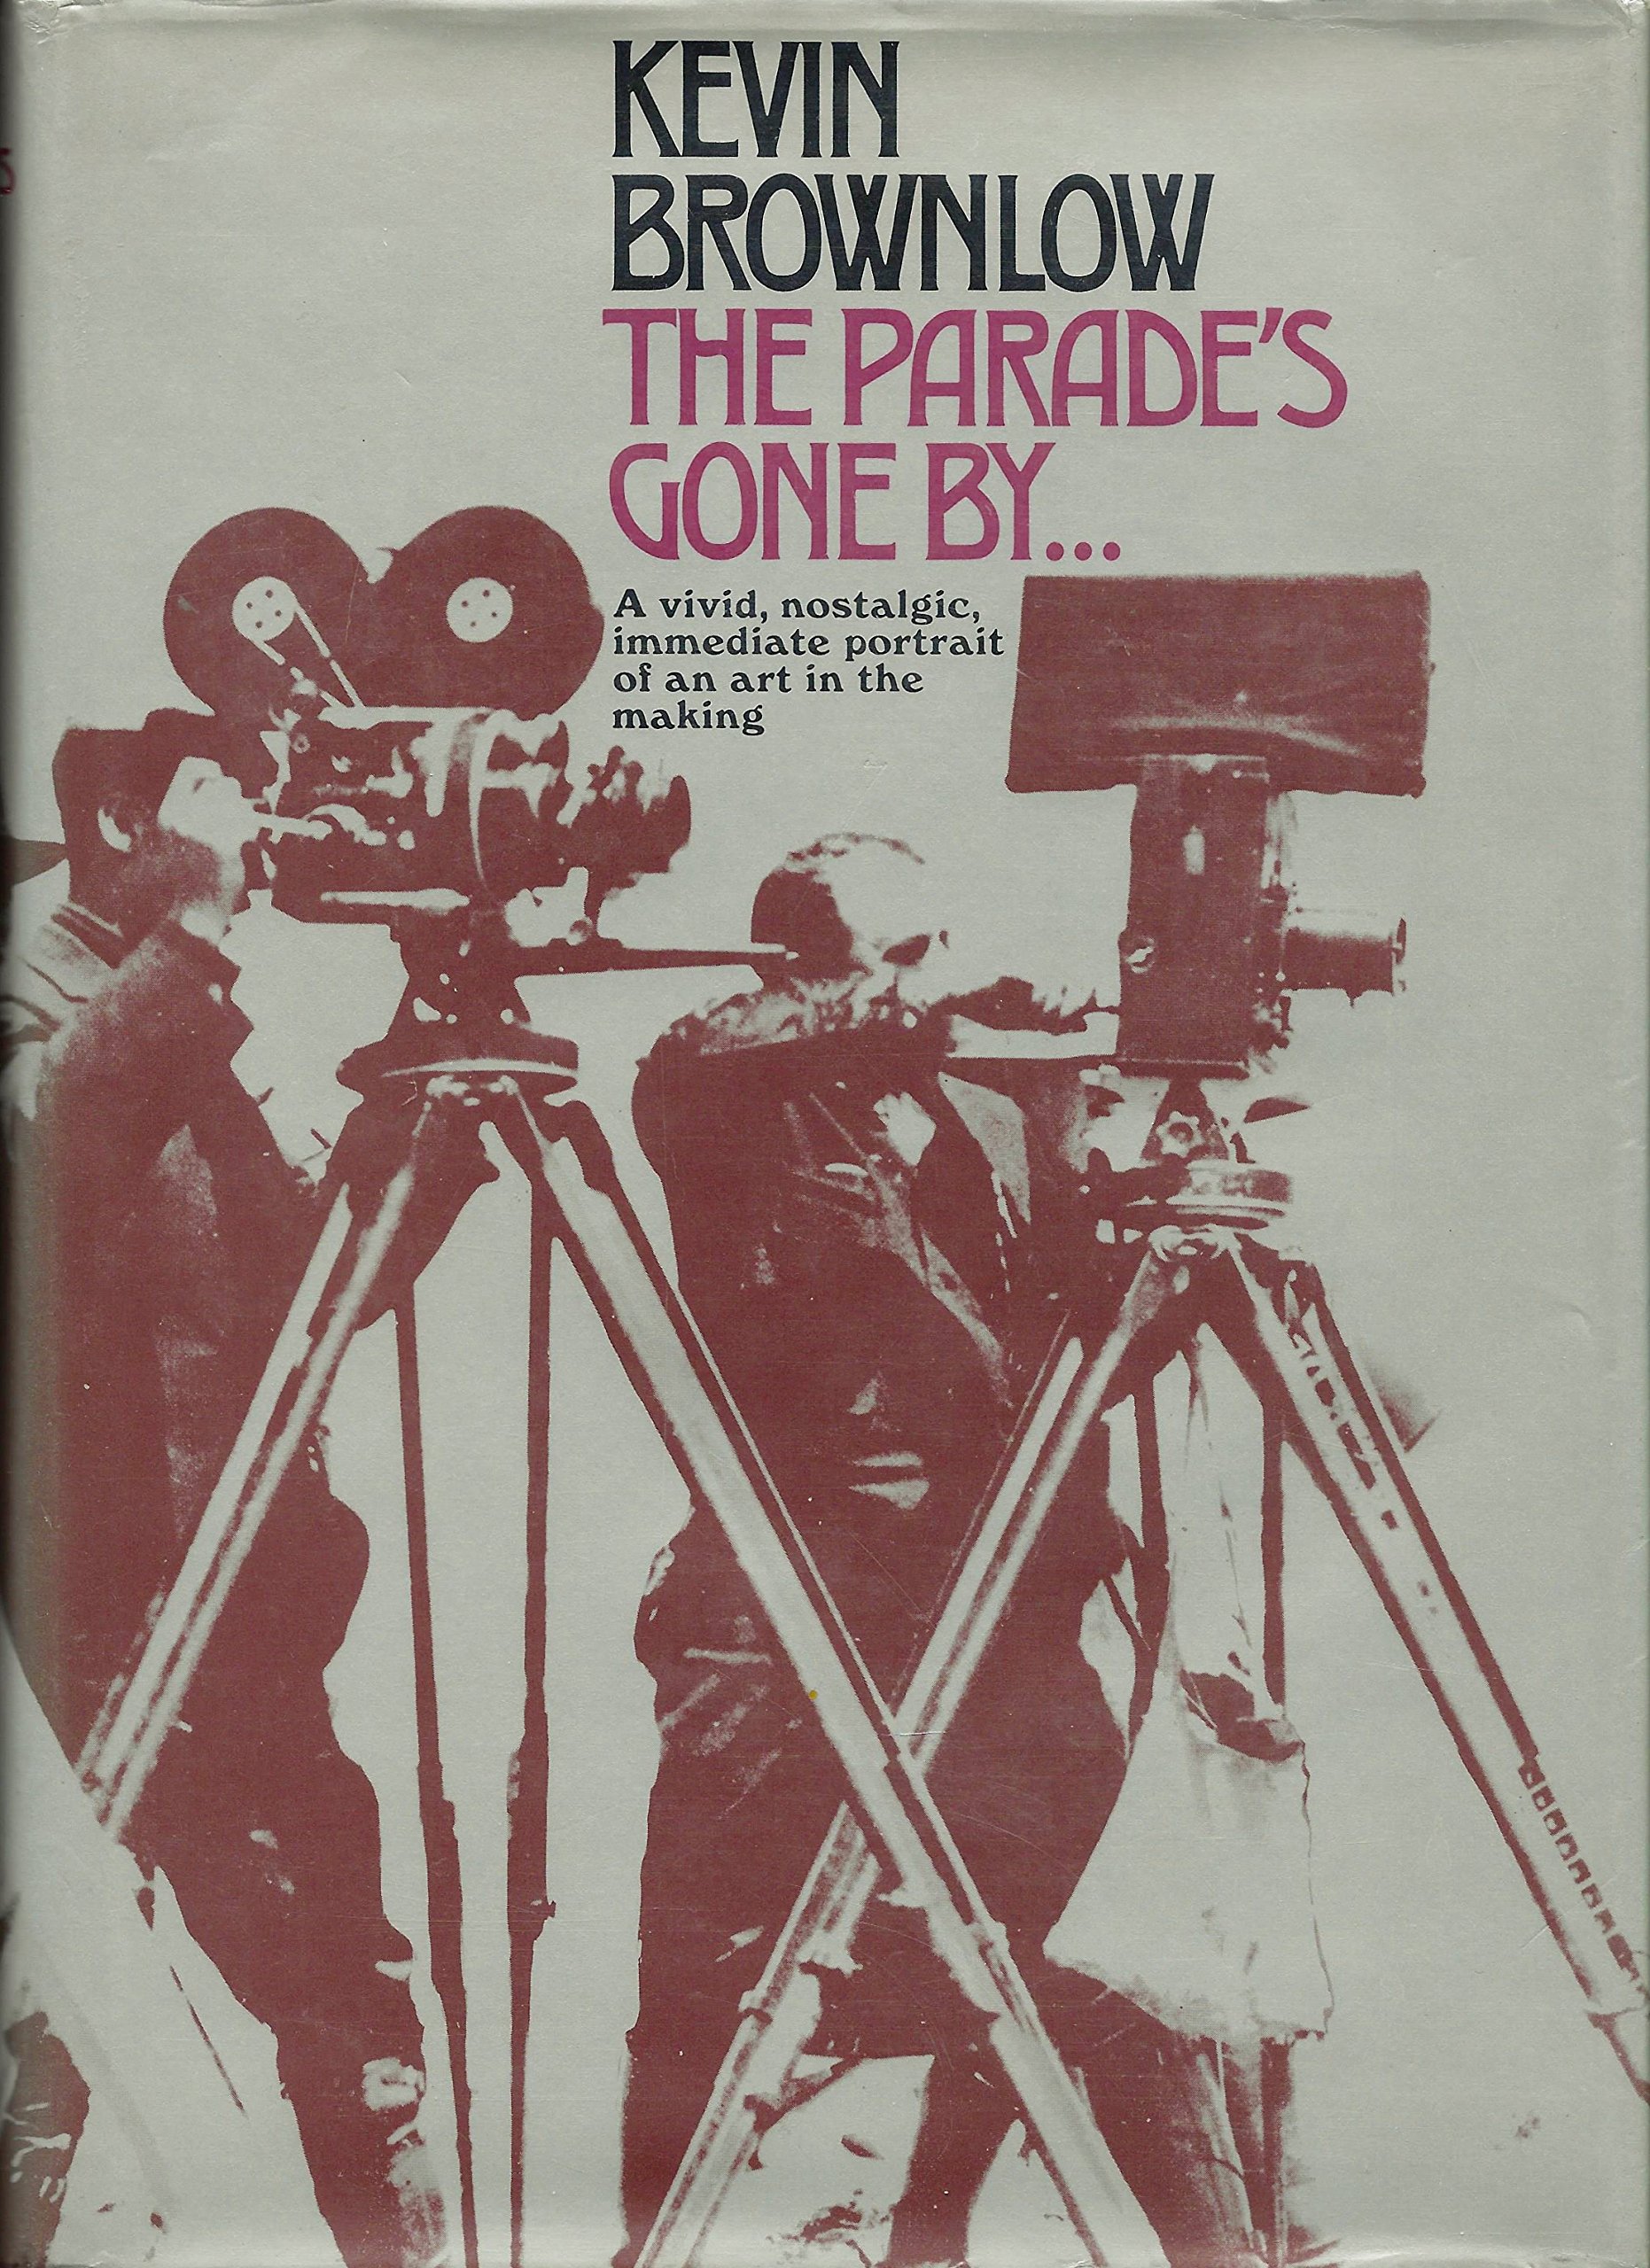 the parade's gone by... a vivid, nostalgic, immediate portrait of an art in the making